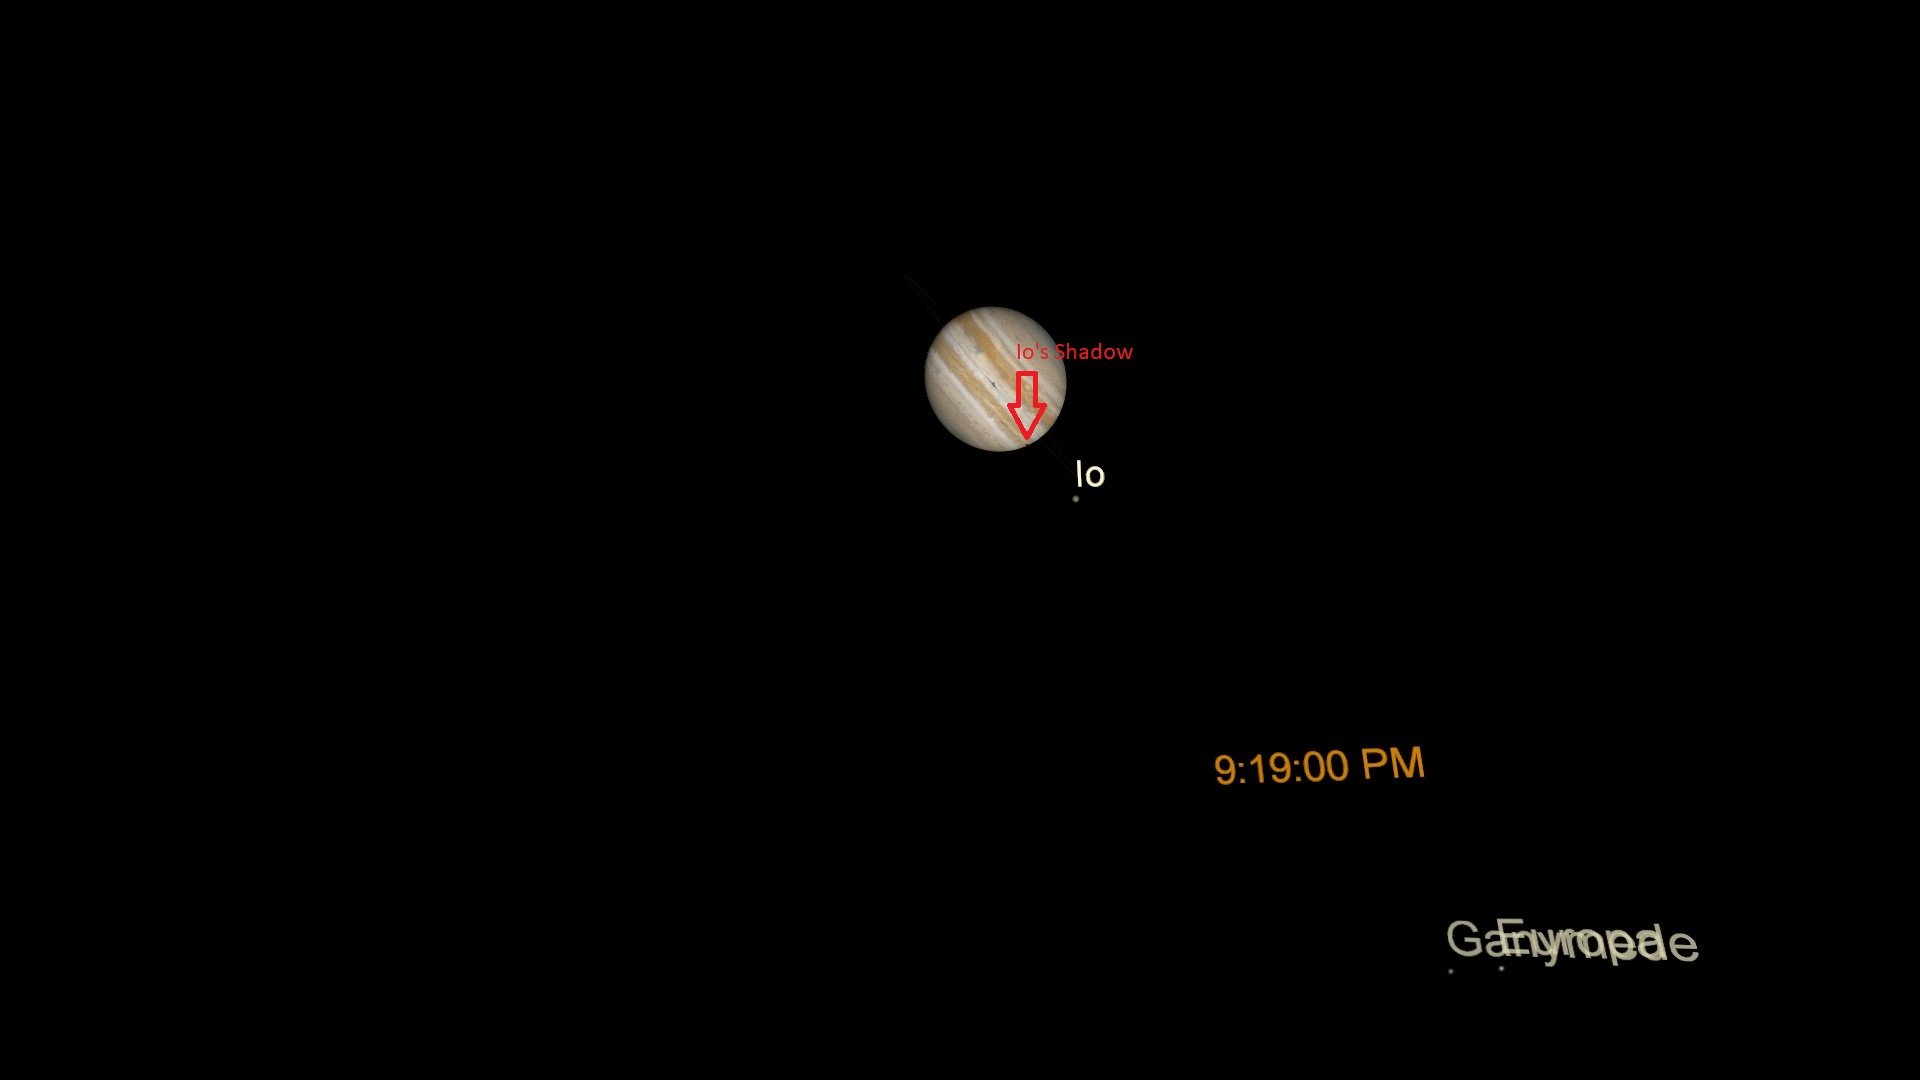 Jupiter and three of its moons as seen through a telescope. A red arrow marks the location of Io's shadow on the right edge of the planet's disc.